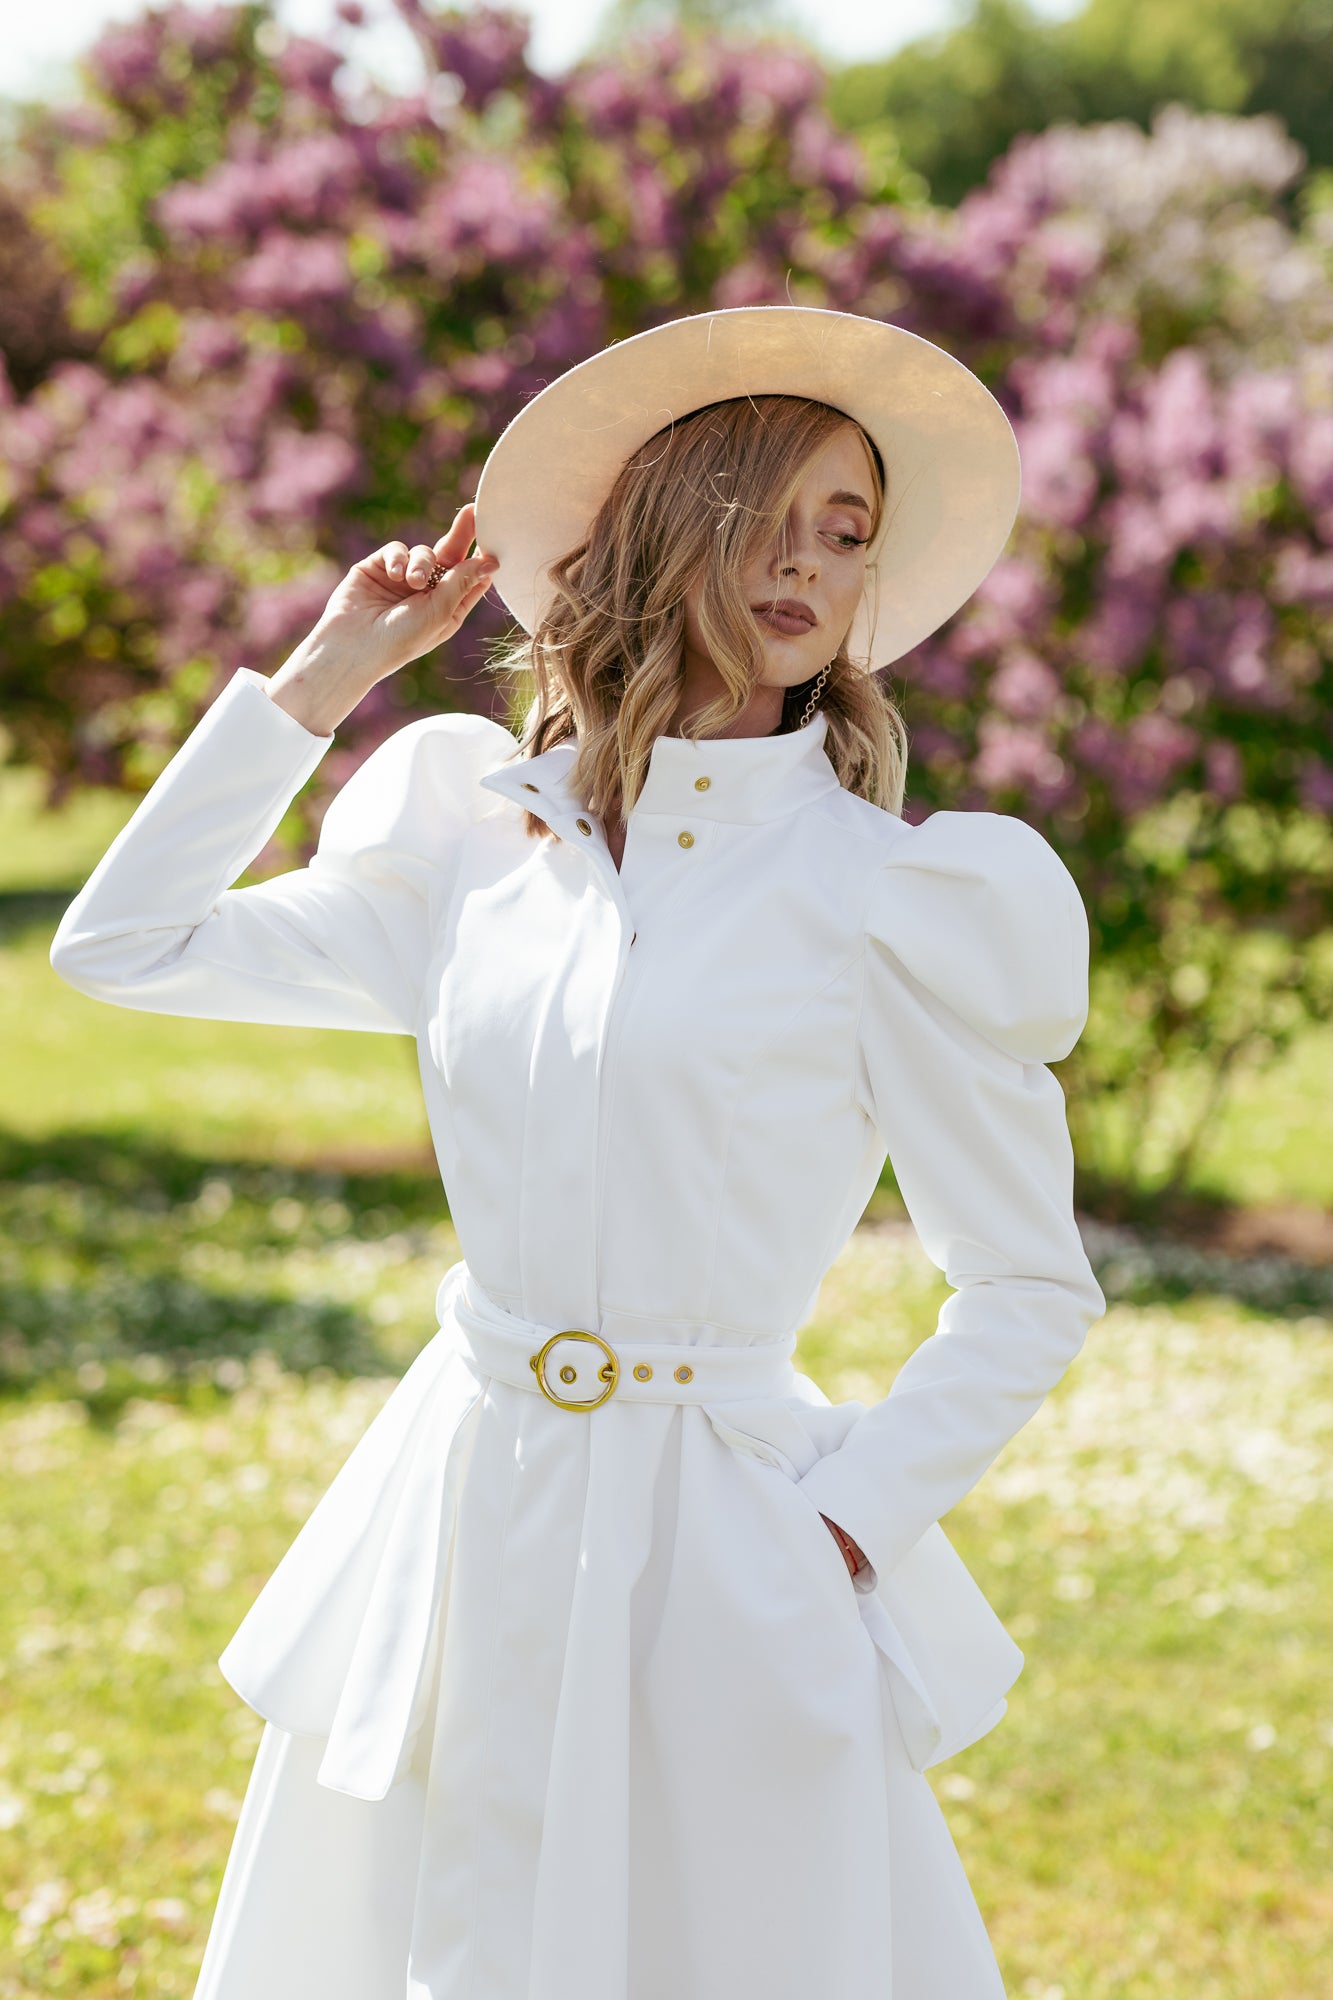 Majestic white coat with hat and peplum belt